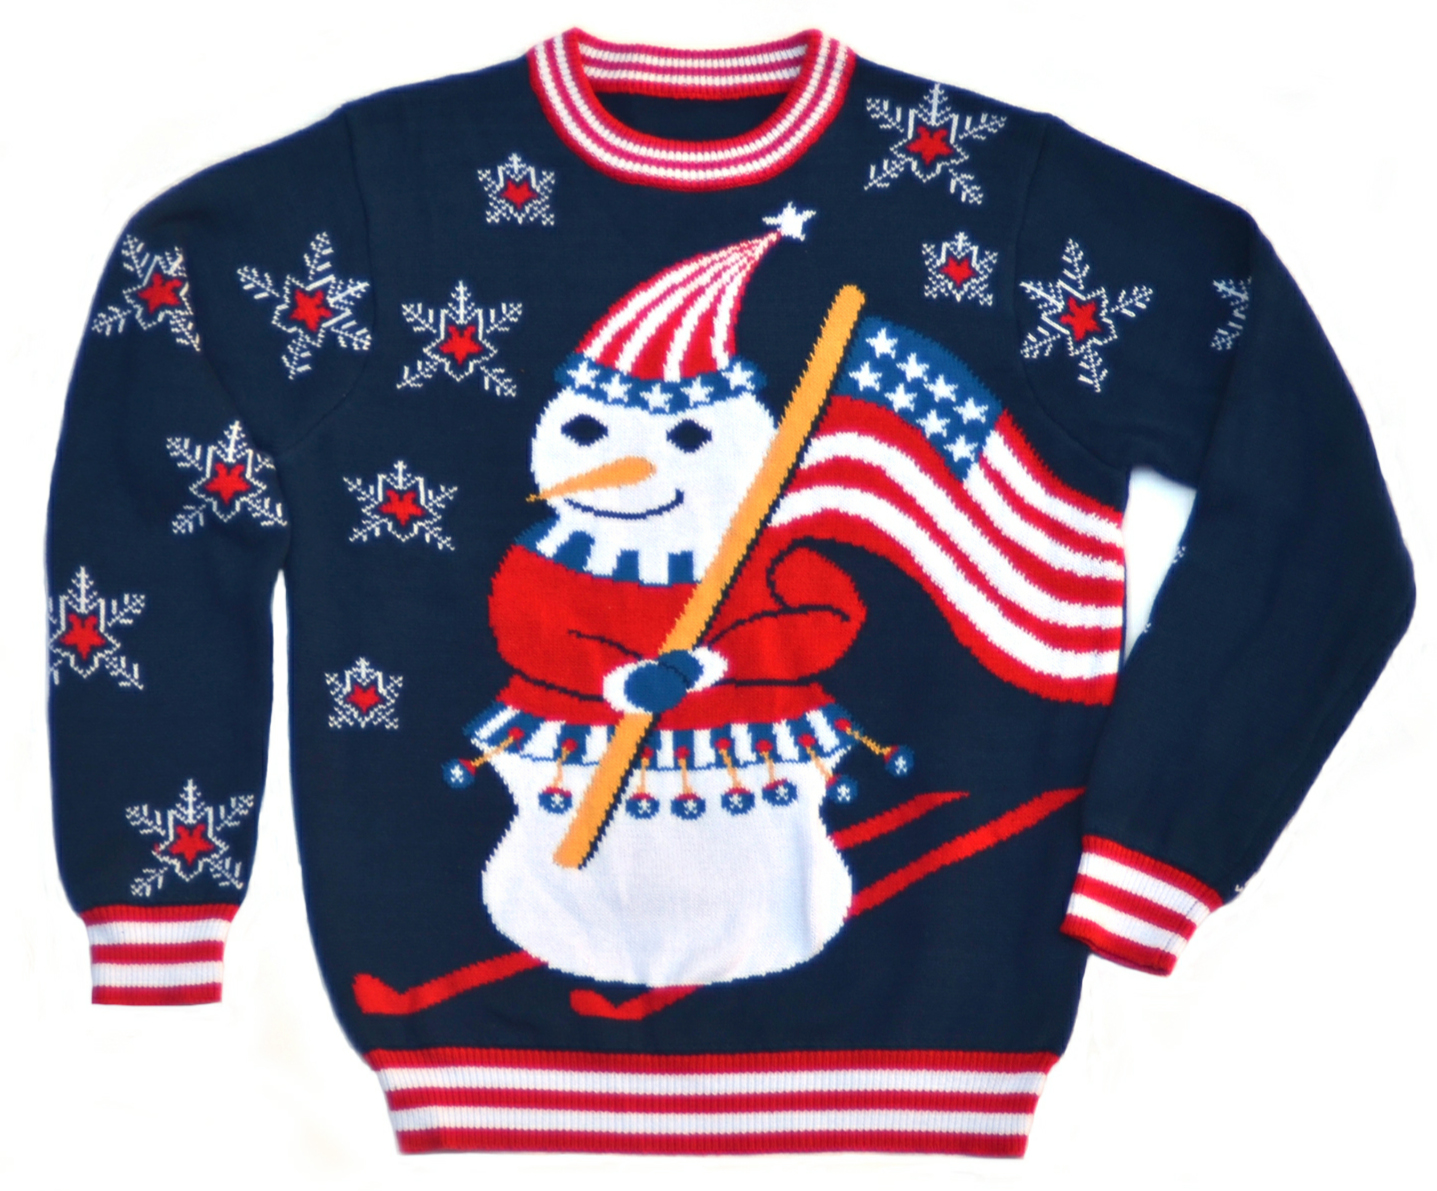 Patriotic Snowman Sweater from My Ugly Christmas Sweater